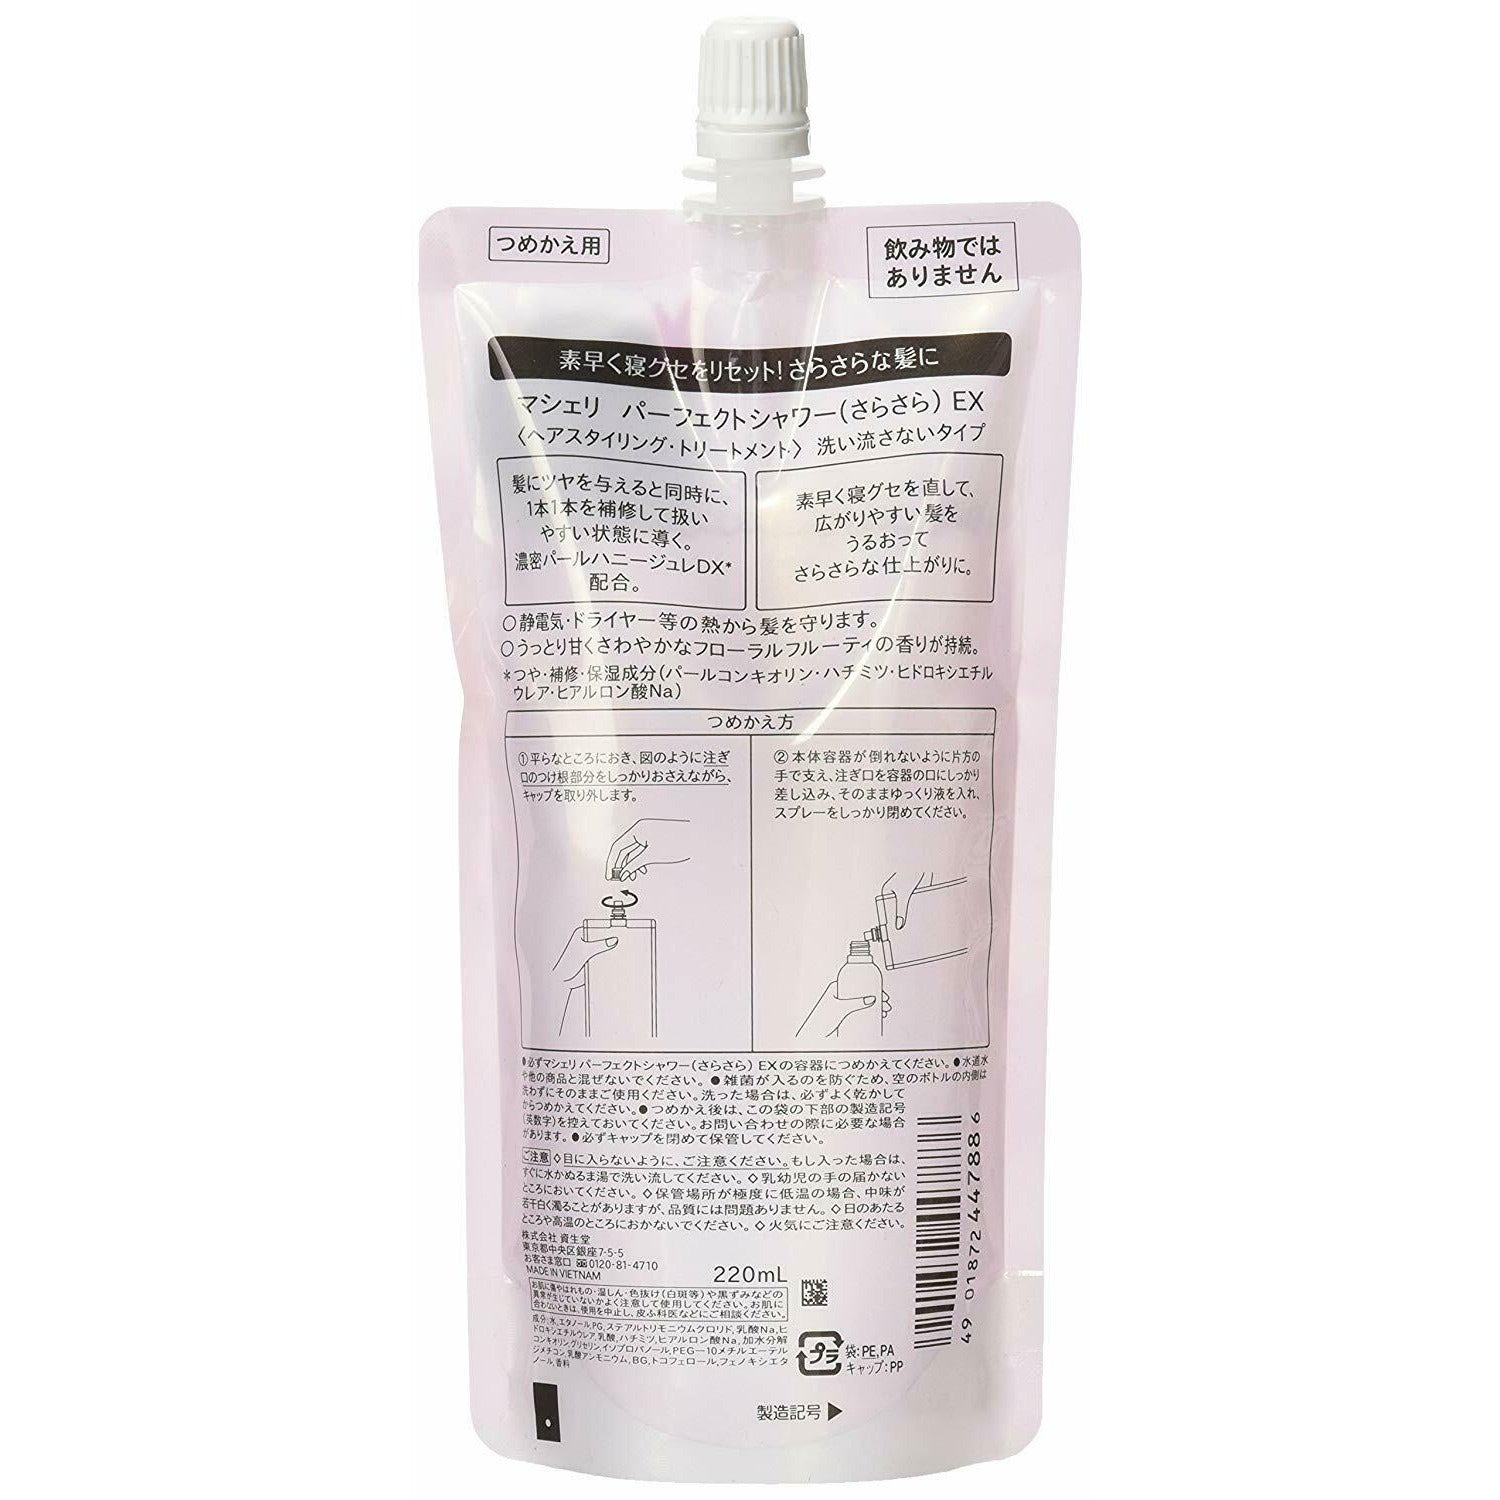 SHISEDO MACHERIE Perfect Shower (Smooth) Styling for Bed Hair Refill 220ml